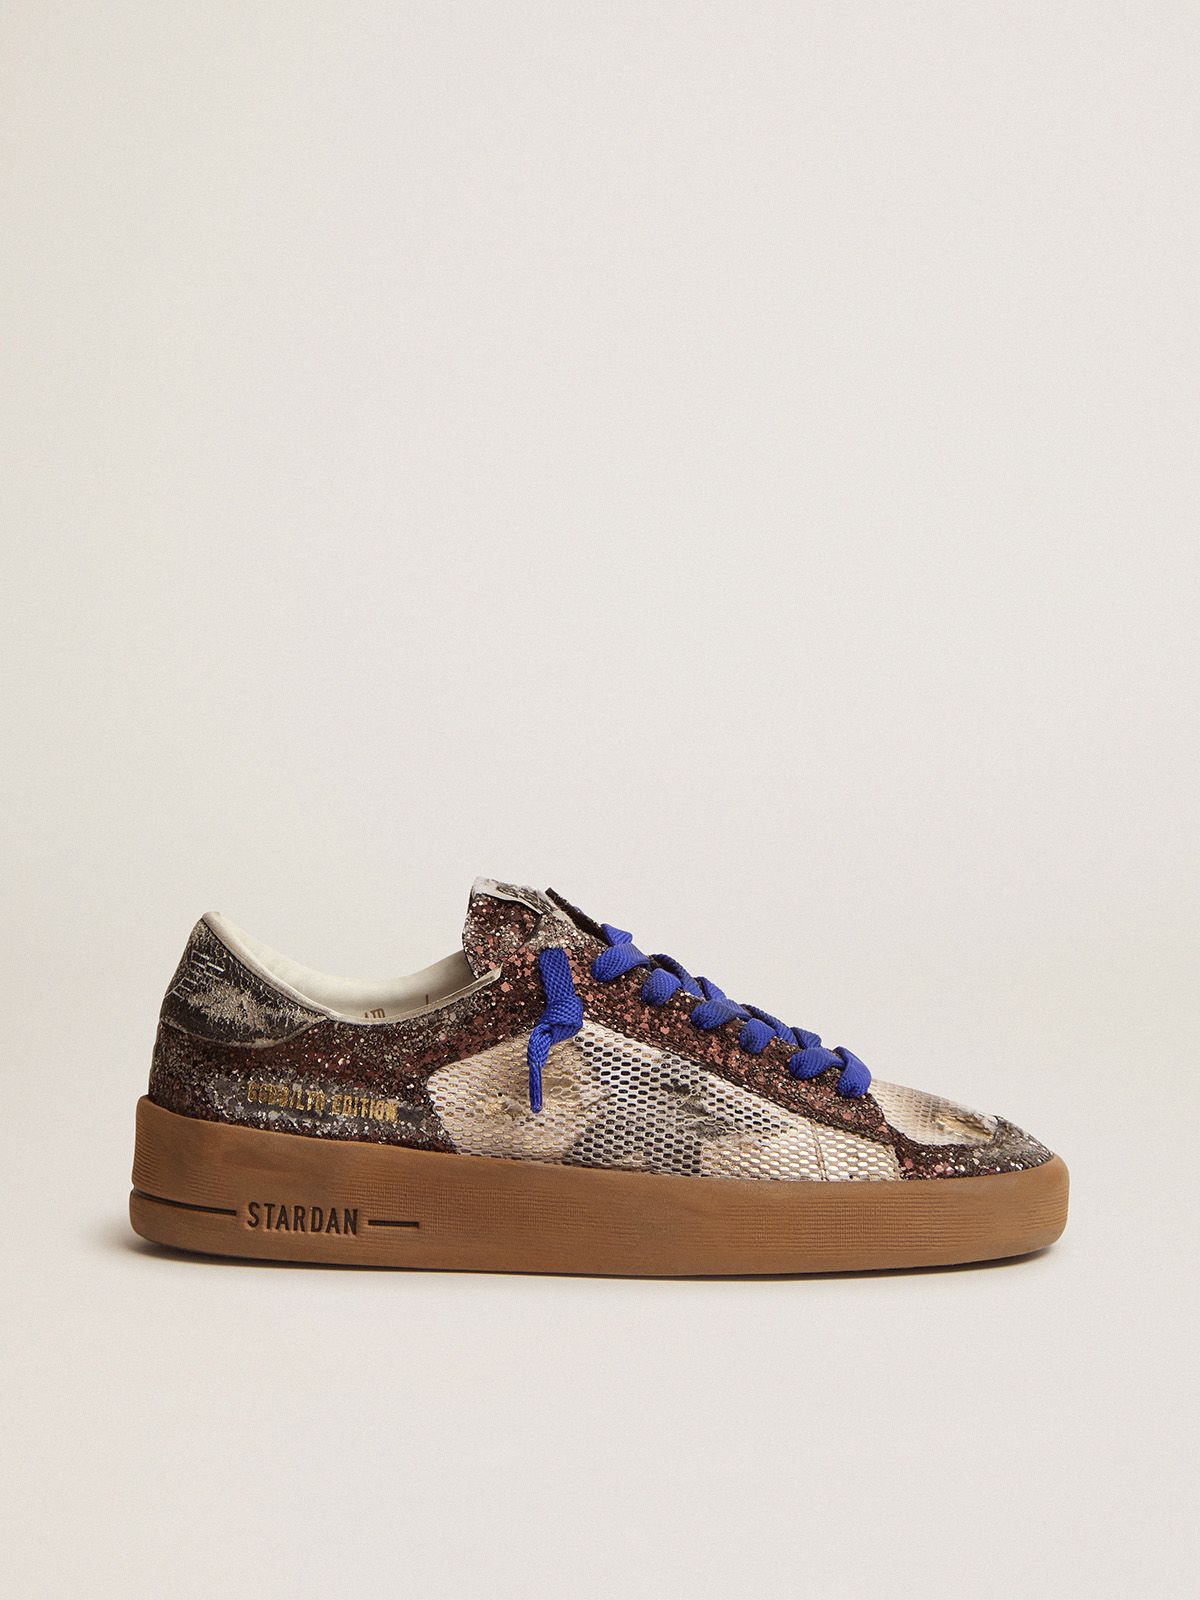 Stardan LAB sneakers with brown glitter upper and black crackle leather star | 